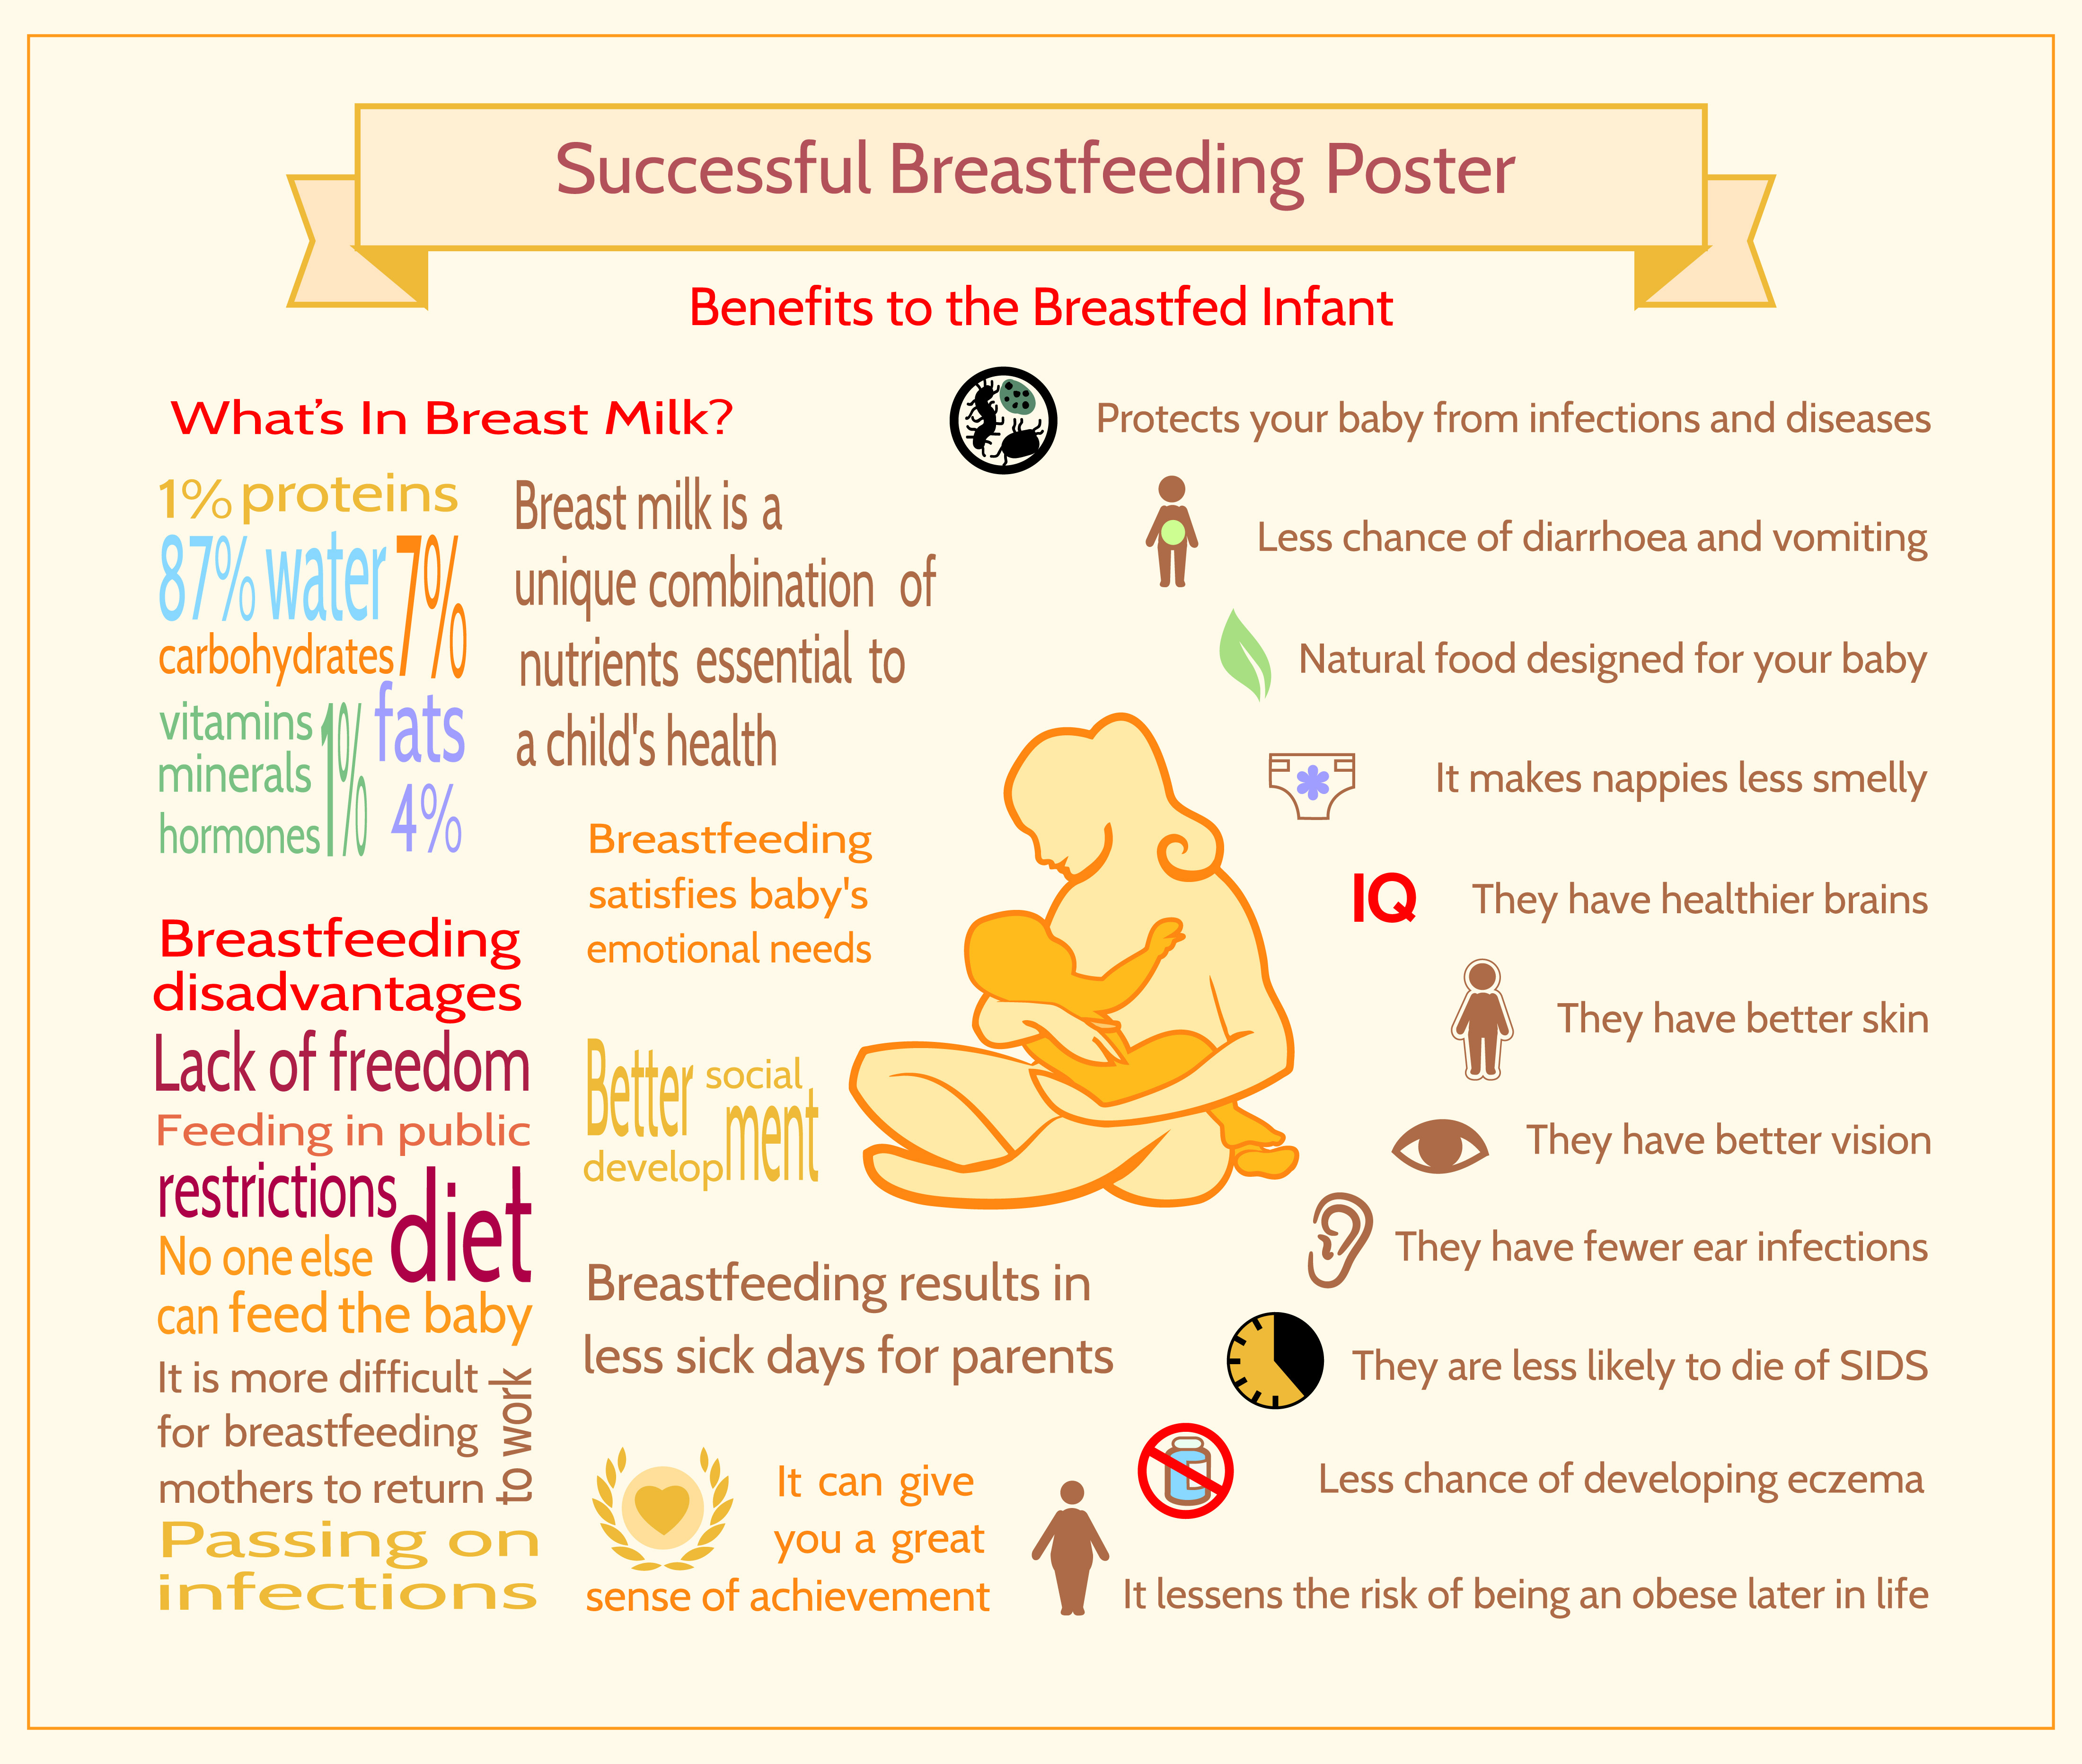  there are many health benefits of breast milk for baby which include a strong immune system, better brain and vision. 